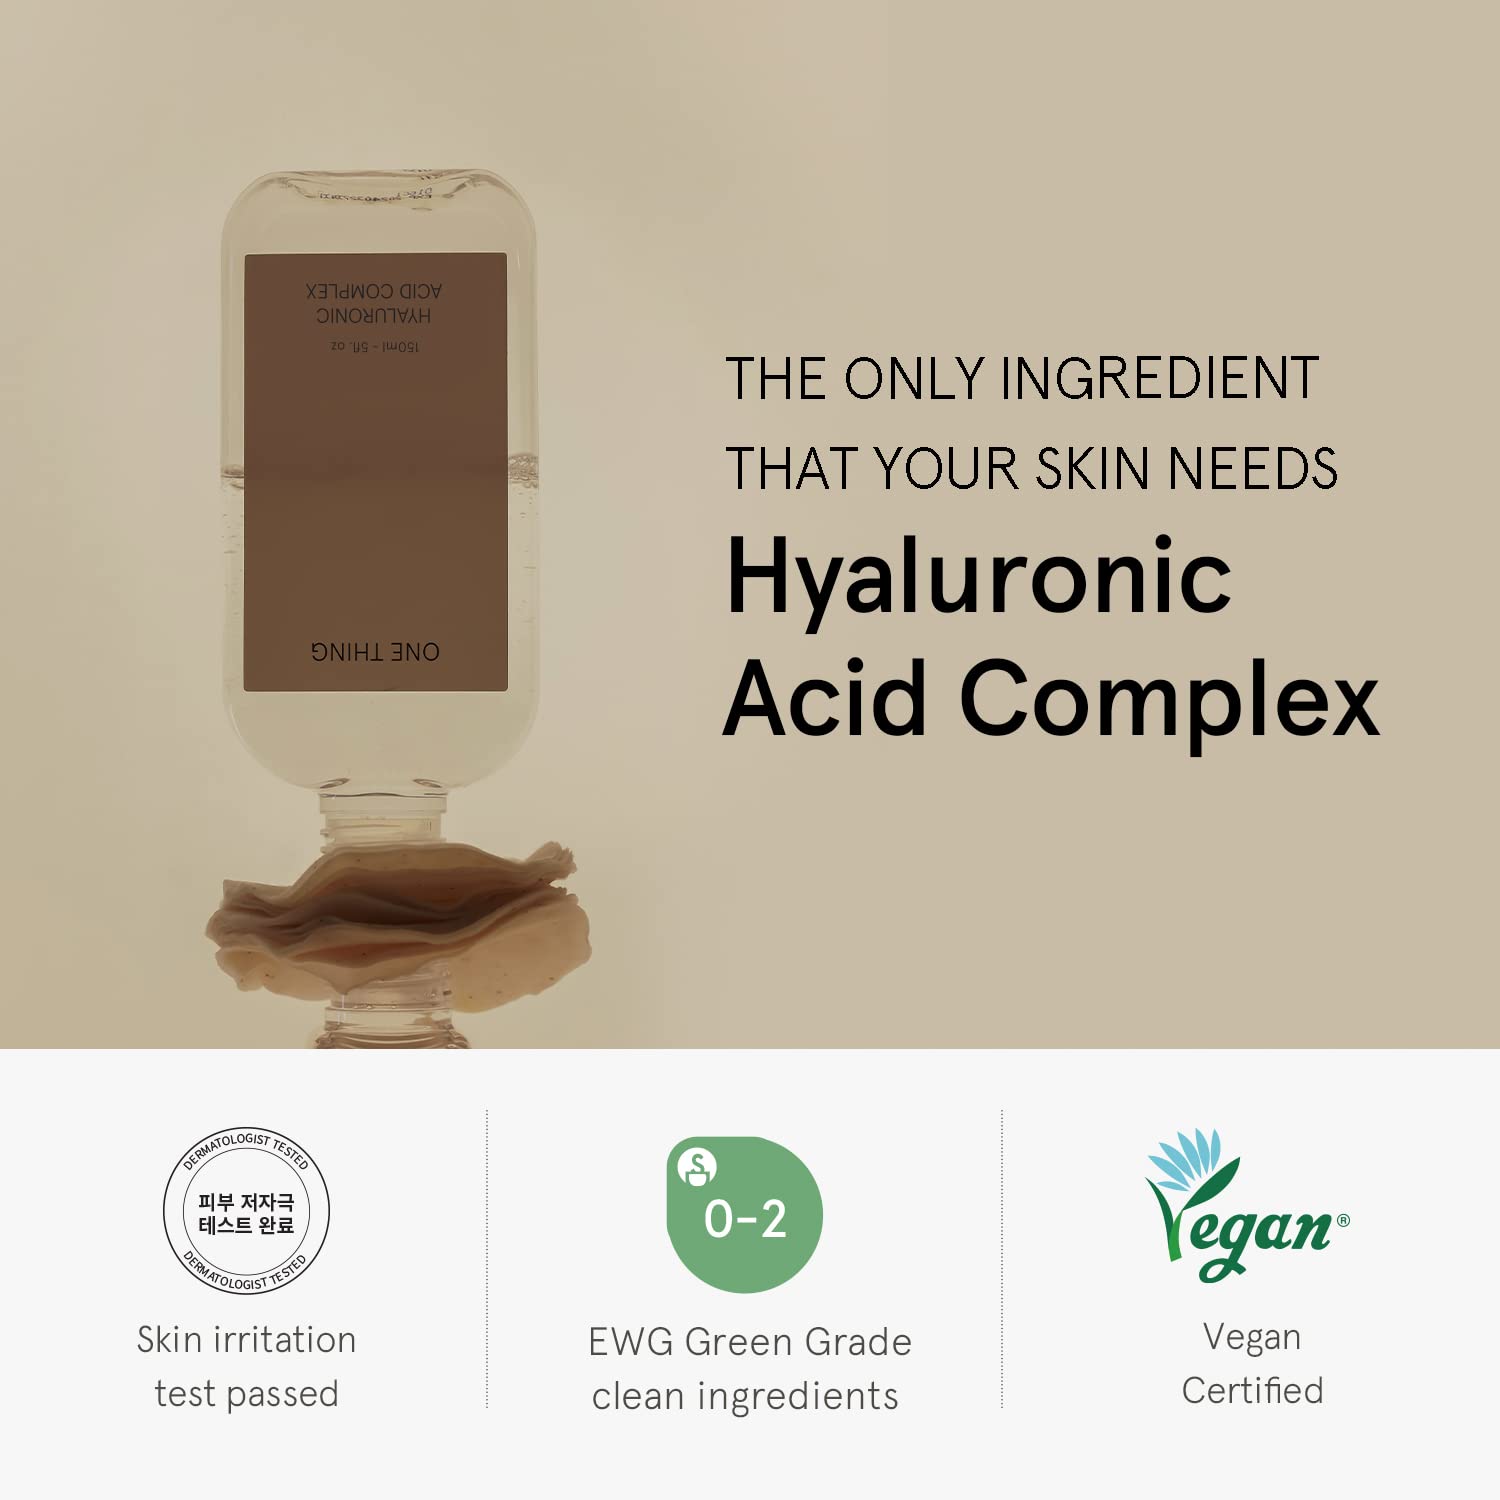 ONE THING Hyaluronic Acid Complex 150ml